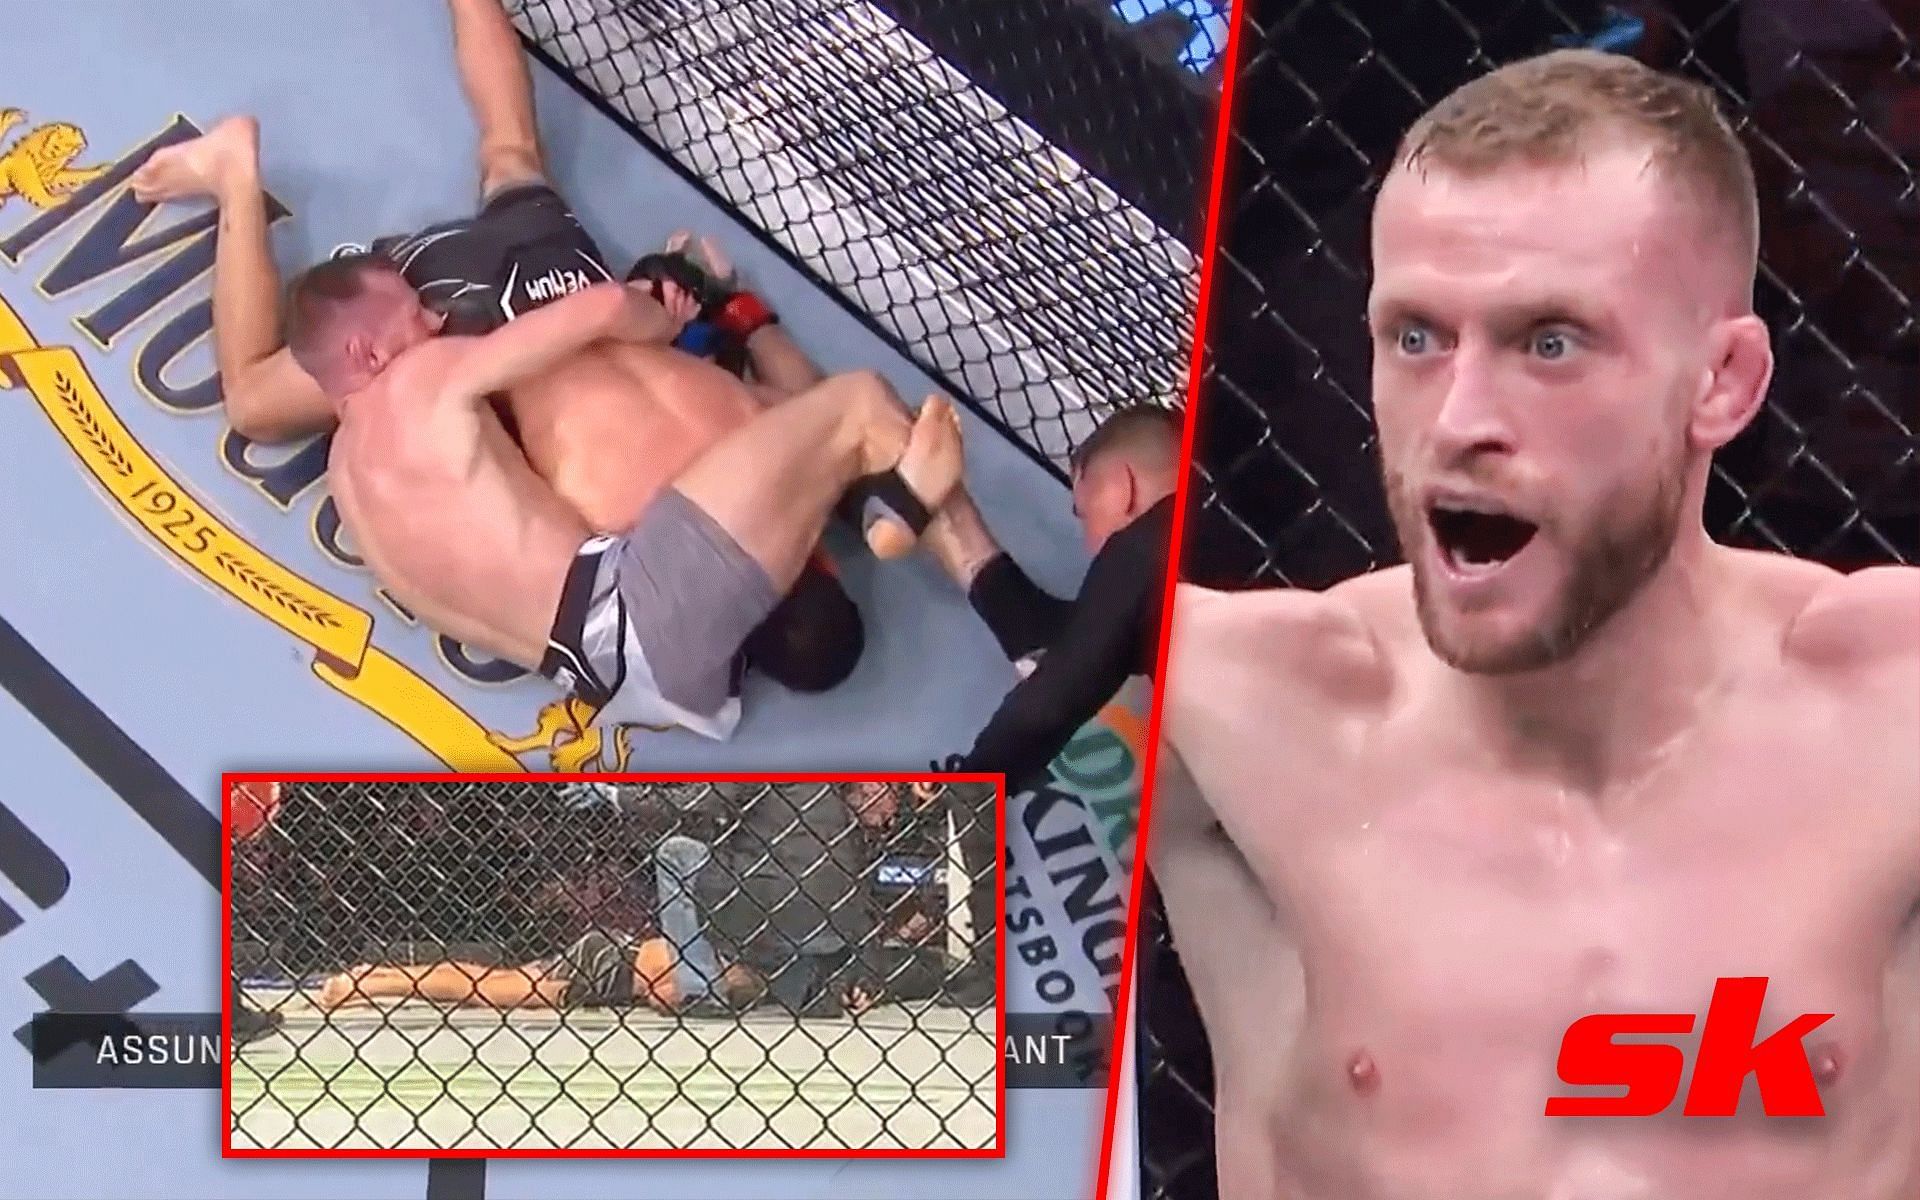 WATVeteran fighter lays unconscious after insanely rare reverse triangle submission at UFC Las Vegas [Images via: @MMAWeeklycom, @fight_4_yours, and @UFCEurope on Twitter]